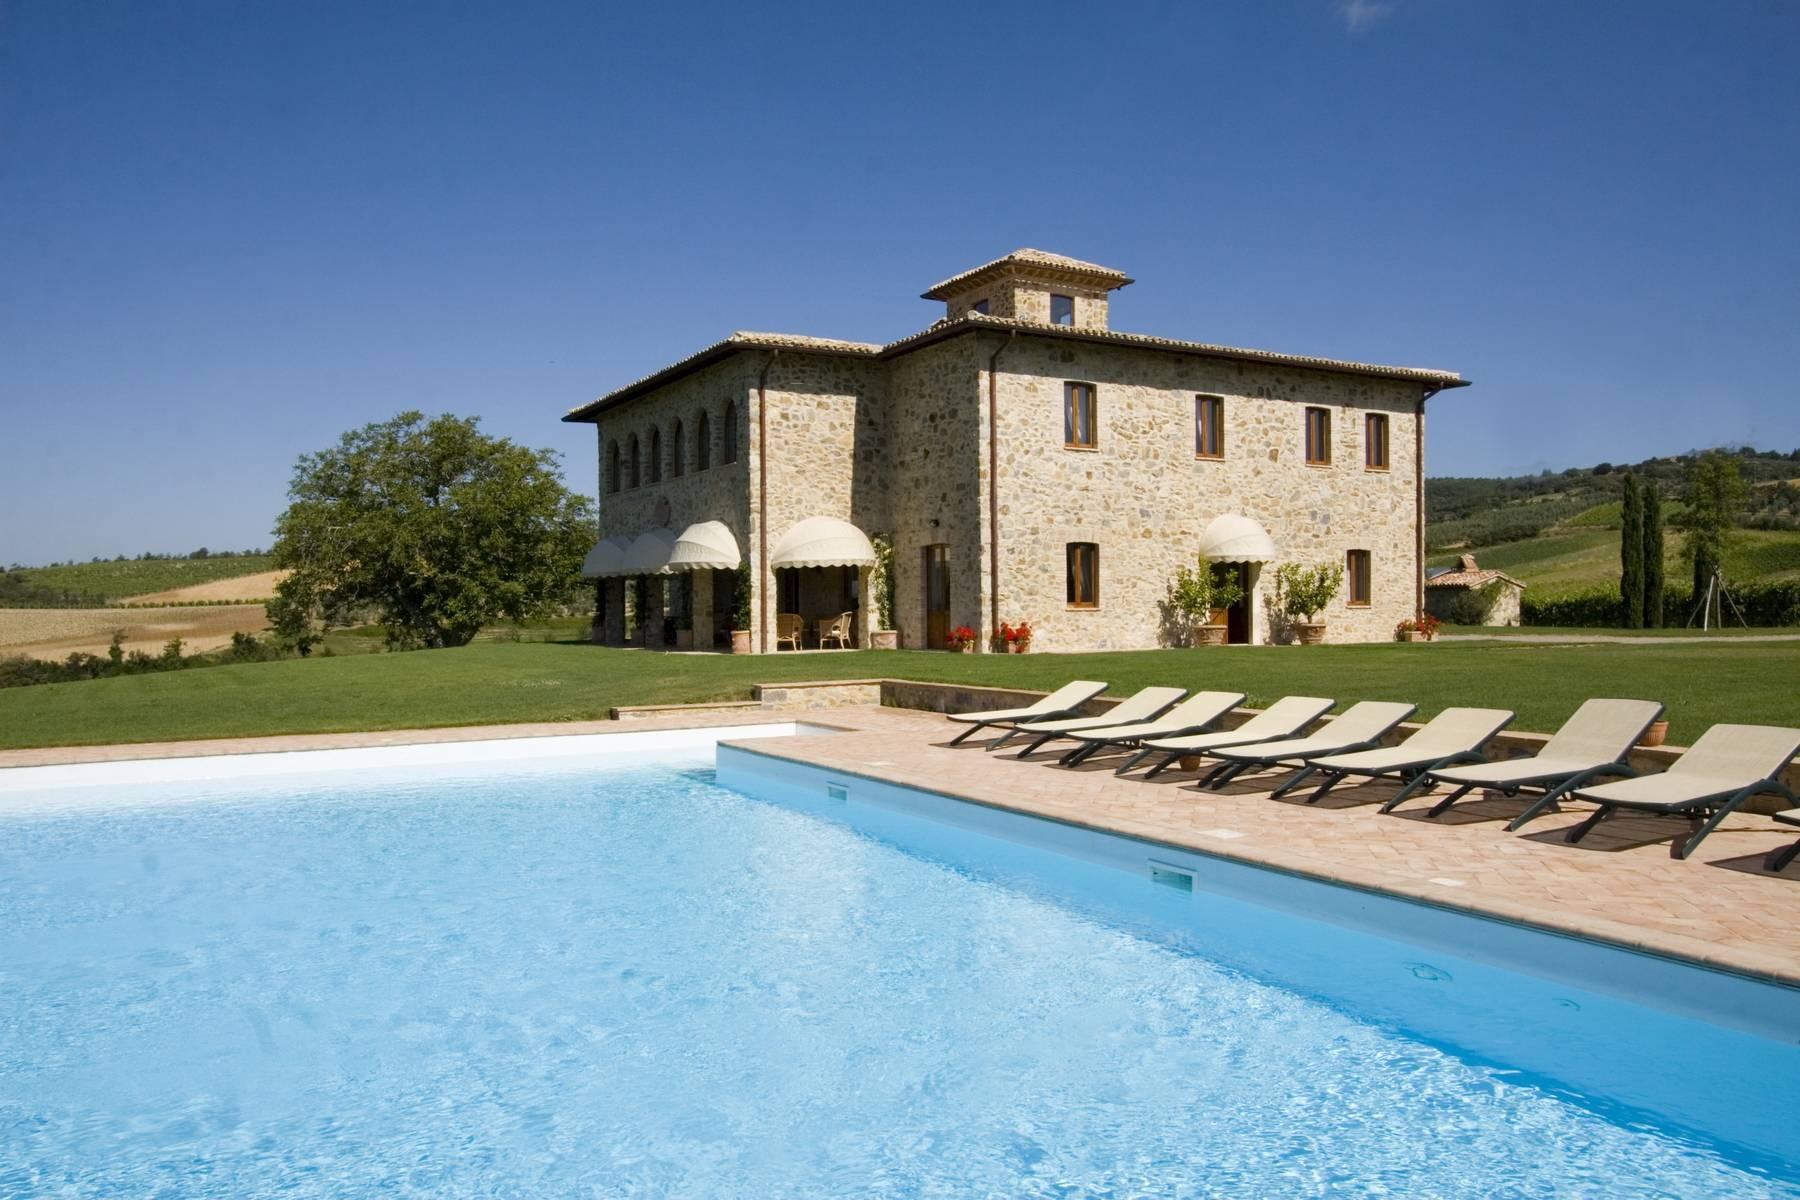 A luxurious estate overlooking the Umbrian countryside - 2